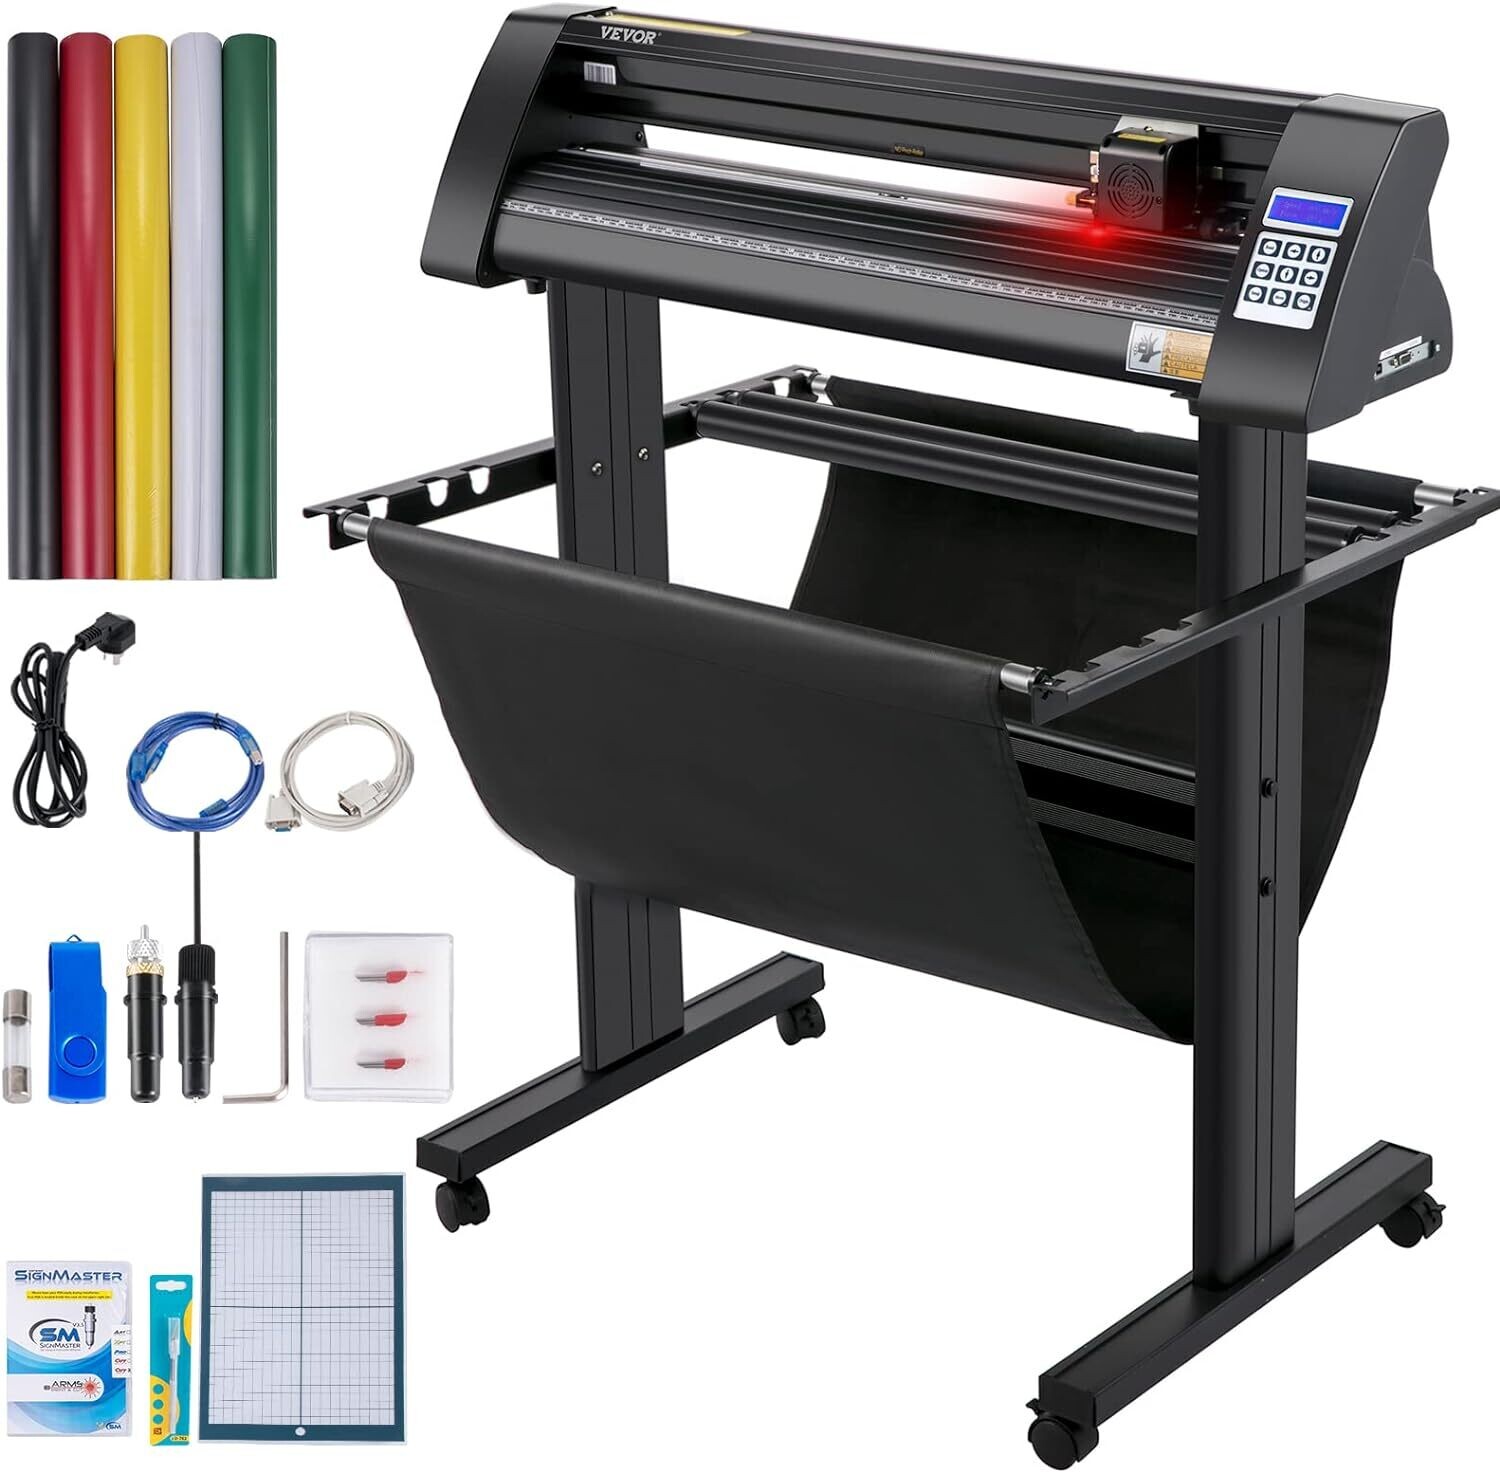 Vinyl Cutting Plotter, Cutting Machine with Signmaster Software Floor Stand, Precise Calibration for Plotting and Cutting Paper